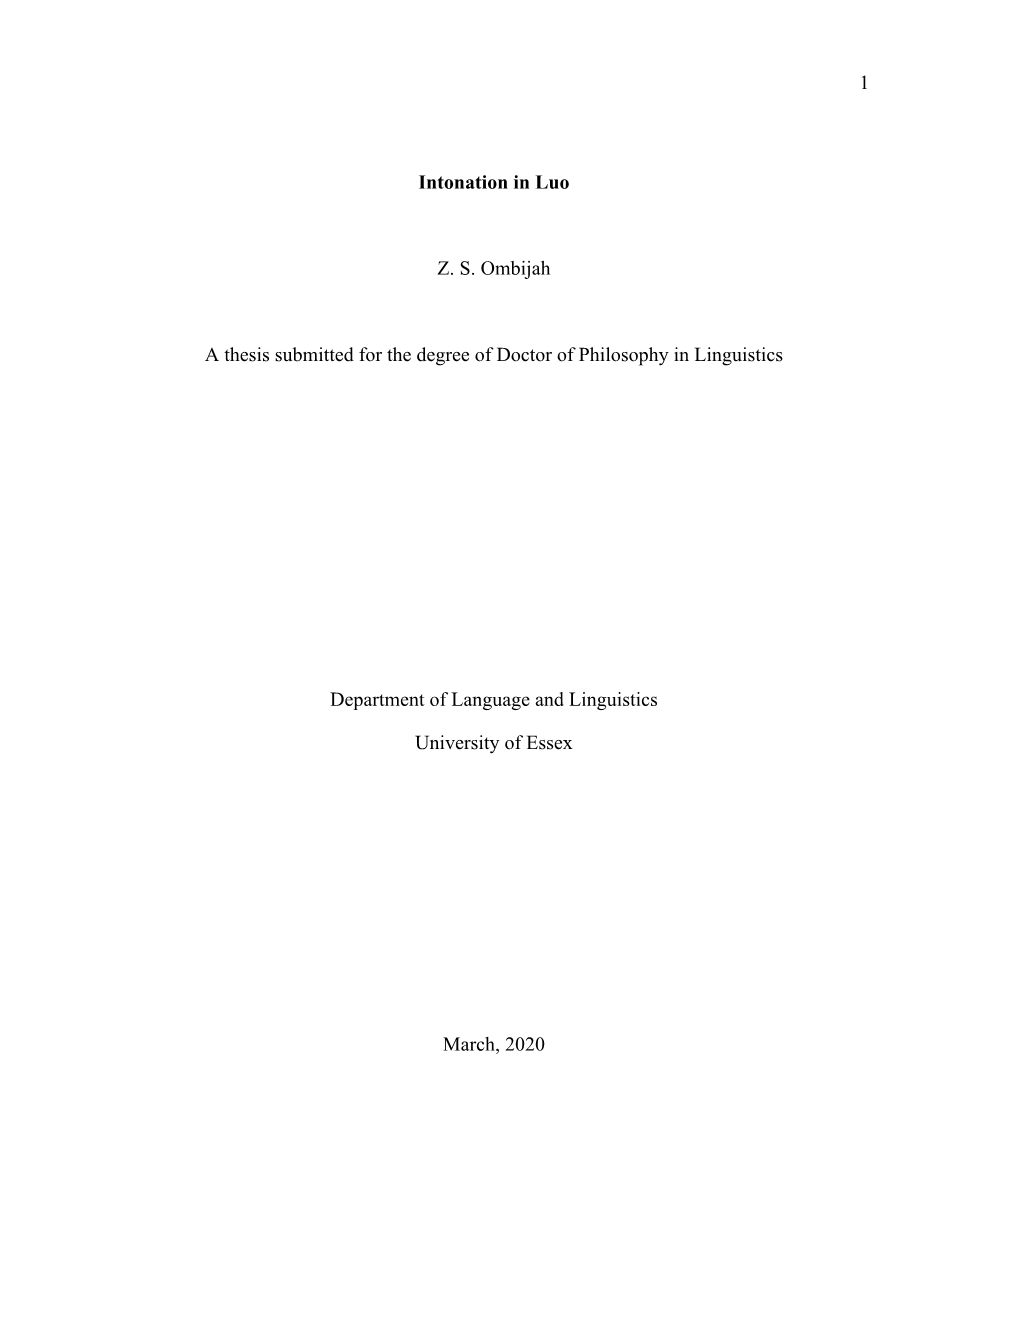 1 Intonation in Luo Z. S. Ombijah a Thesis Submitted for the Degree Of